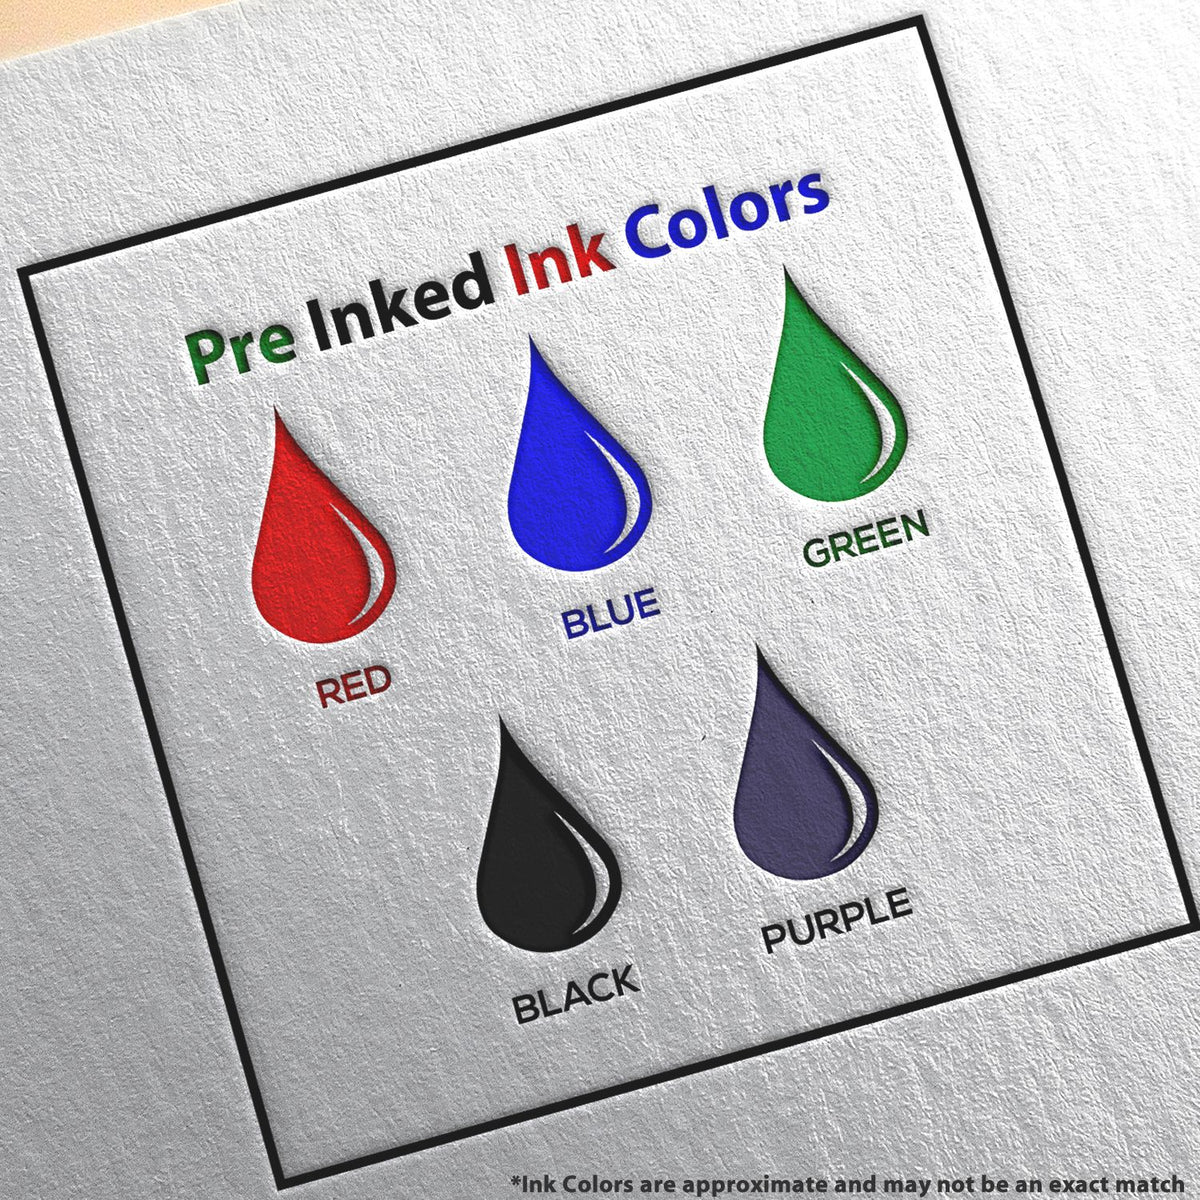 A picture showing the different ink colors or hues available for the Premium MaxLight Pre-Inked South Carolina Engineering Stamp product.